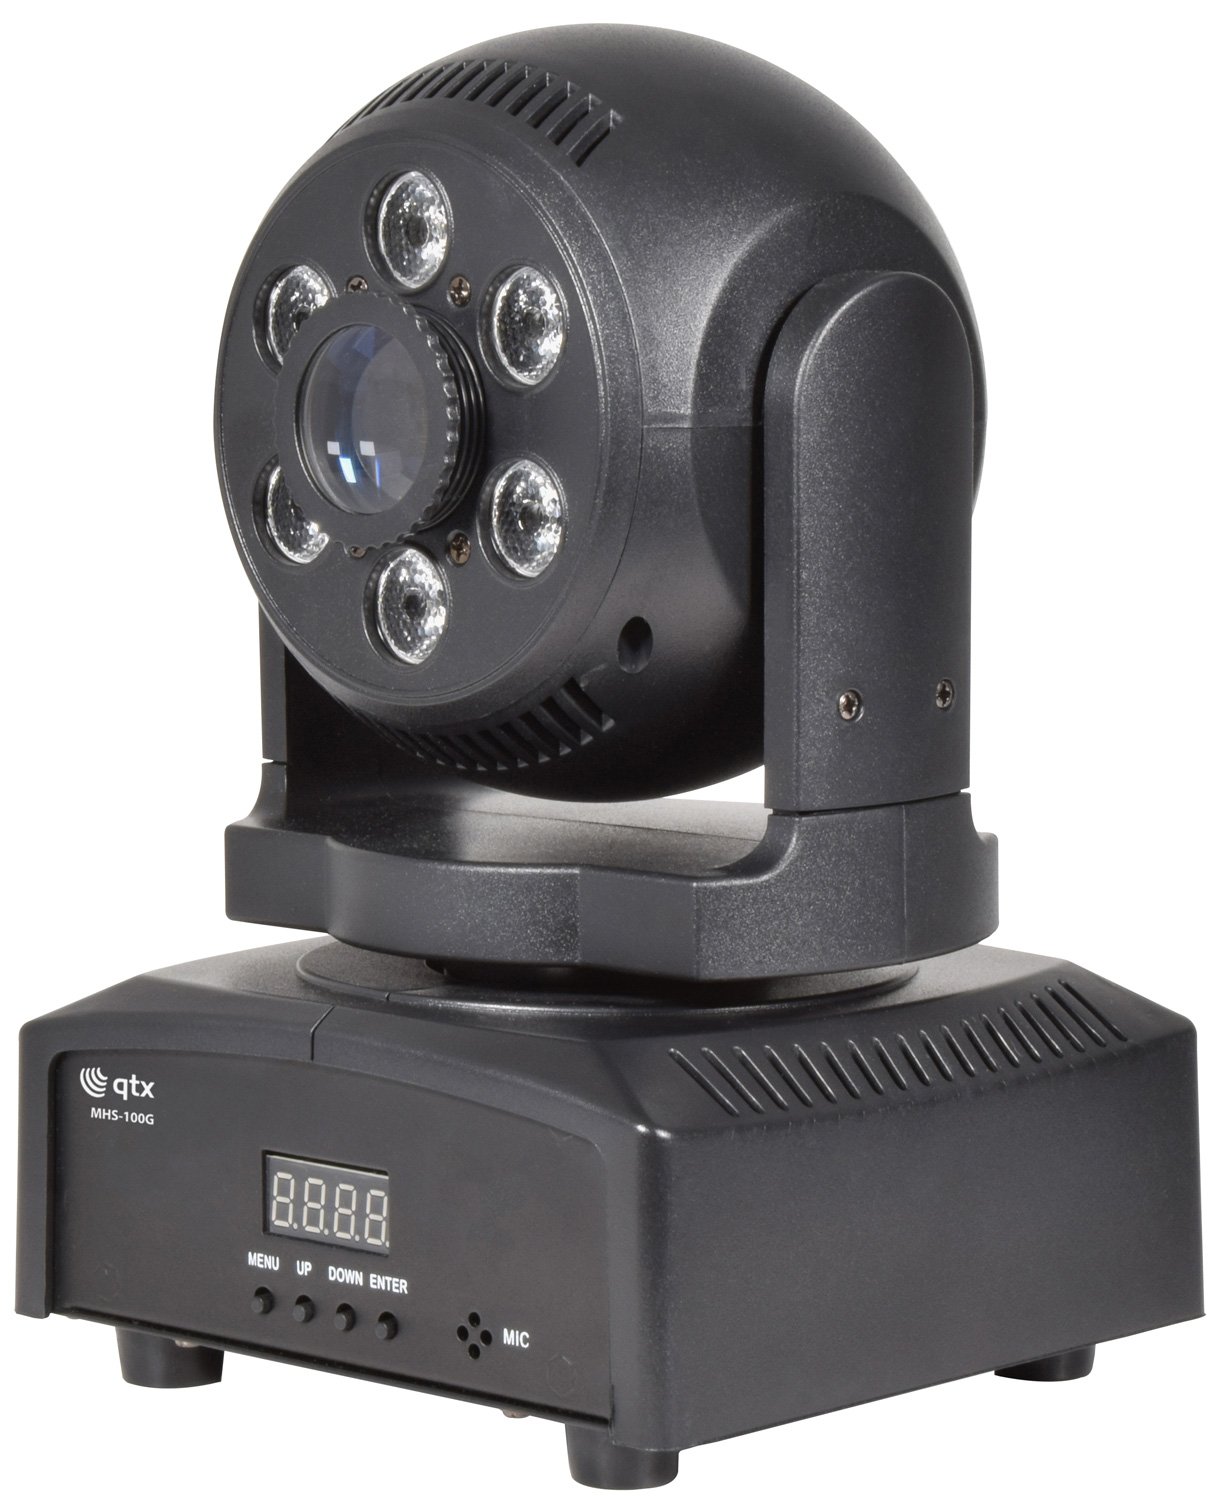 MHS-100G: 100W Spot-Wash LED Moving Head with GOBOs Spot Wash LED Moving Head